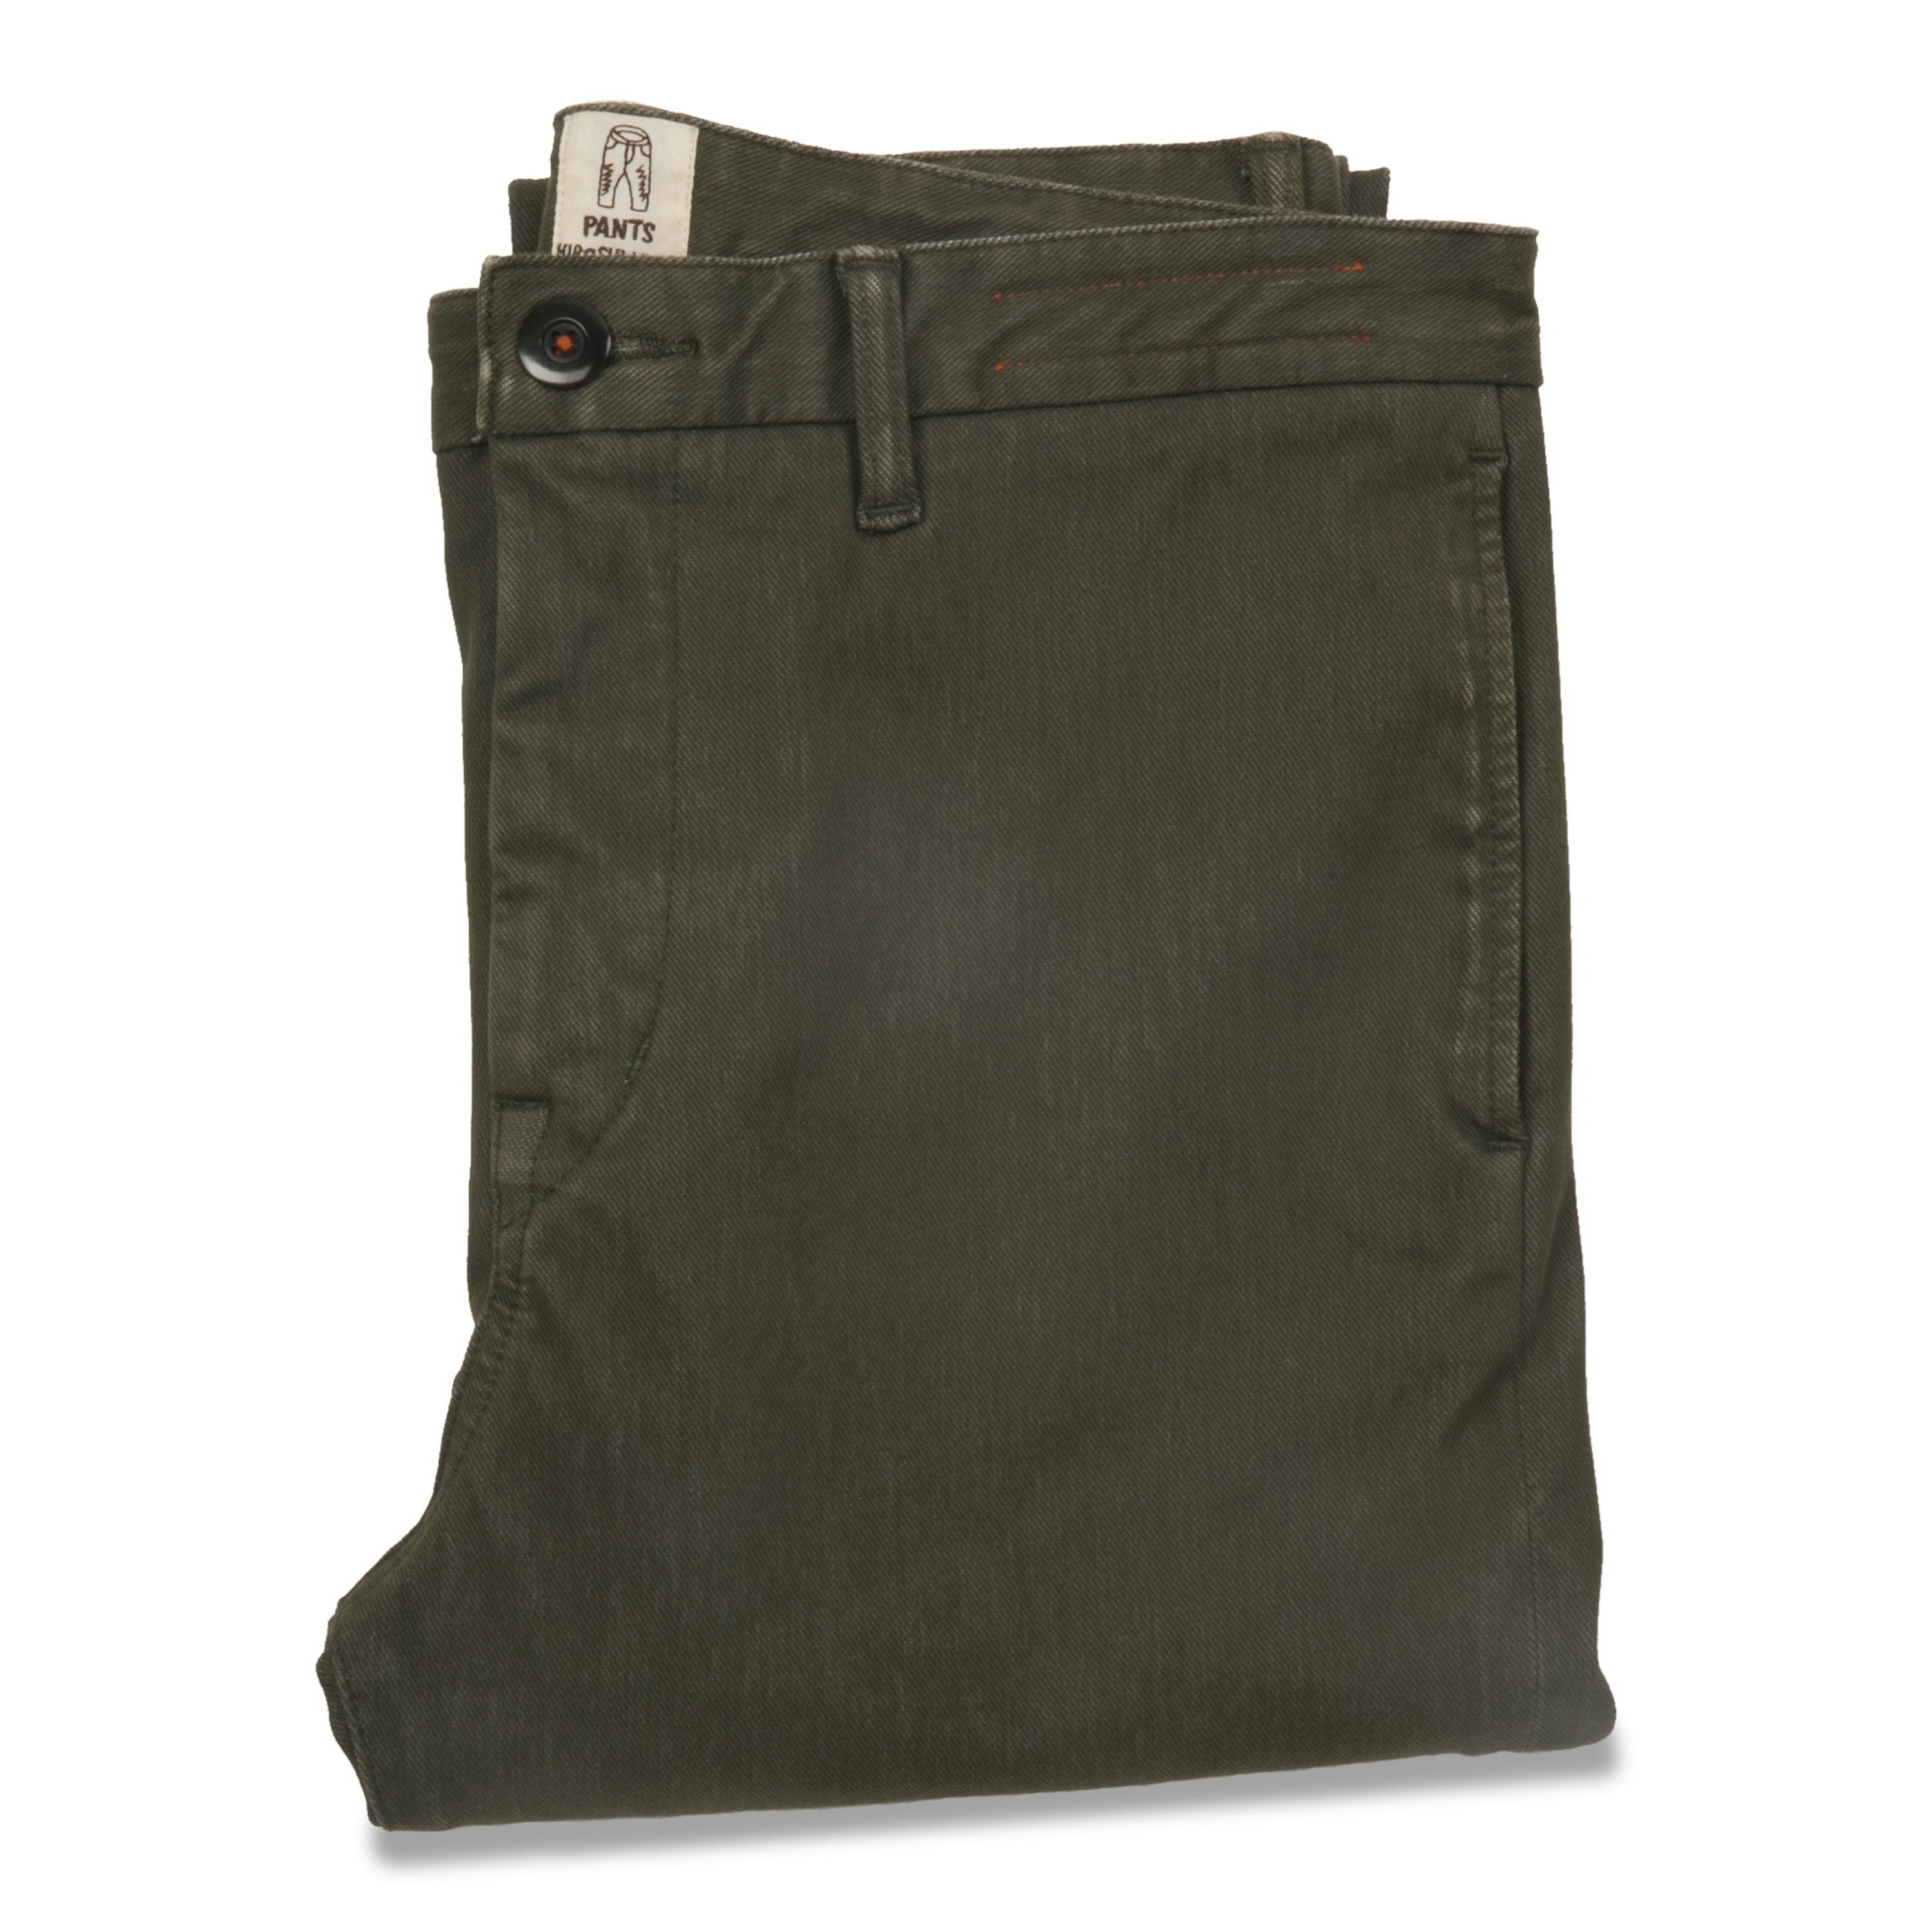 KATO' - The Axe Slim 11oz 4-Way Stretch French Terry - Military Green - City Workshop Men's Supply Co.